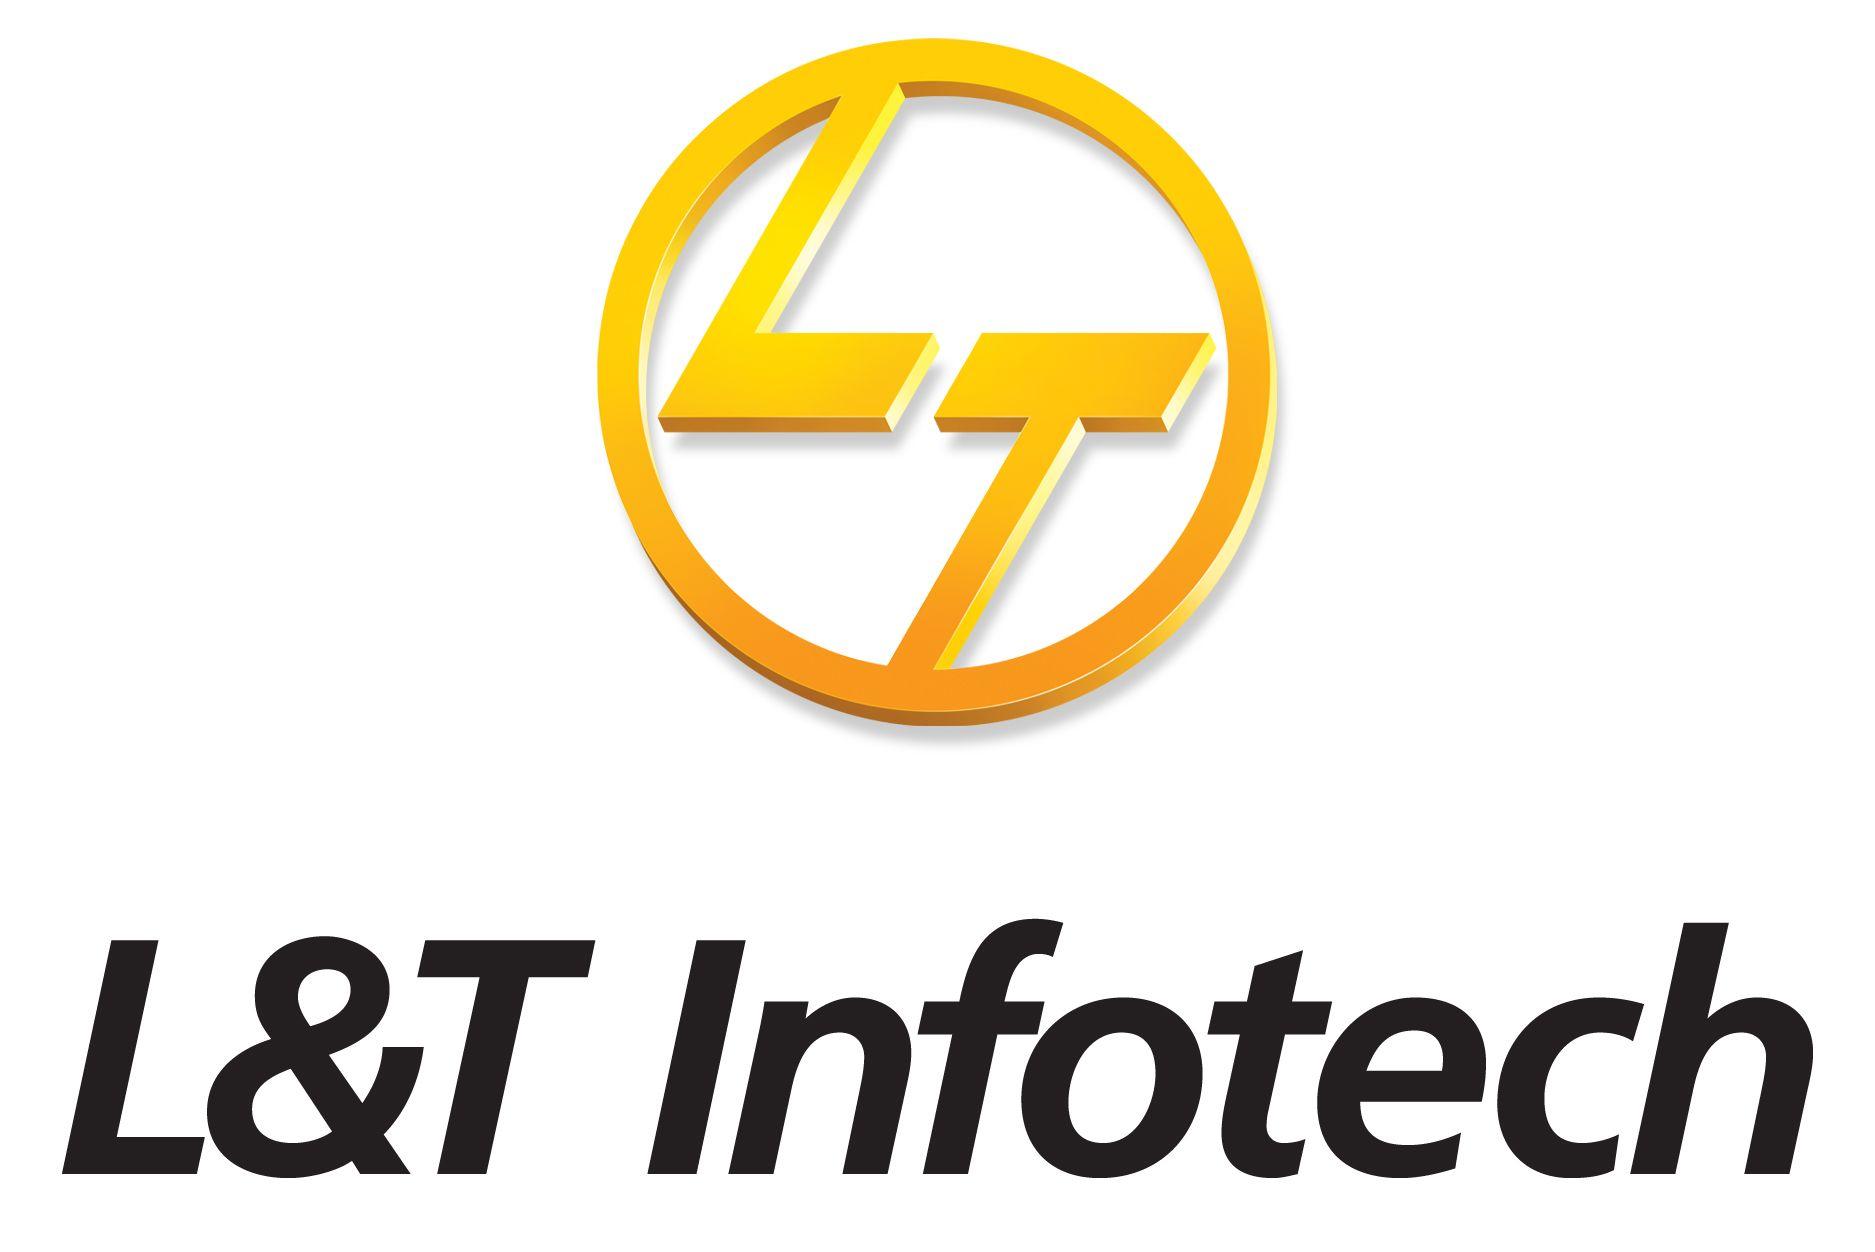 L&T Logo - L&T is india based company and have high value in global market ...